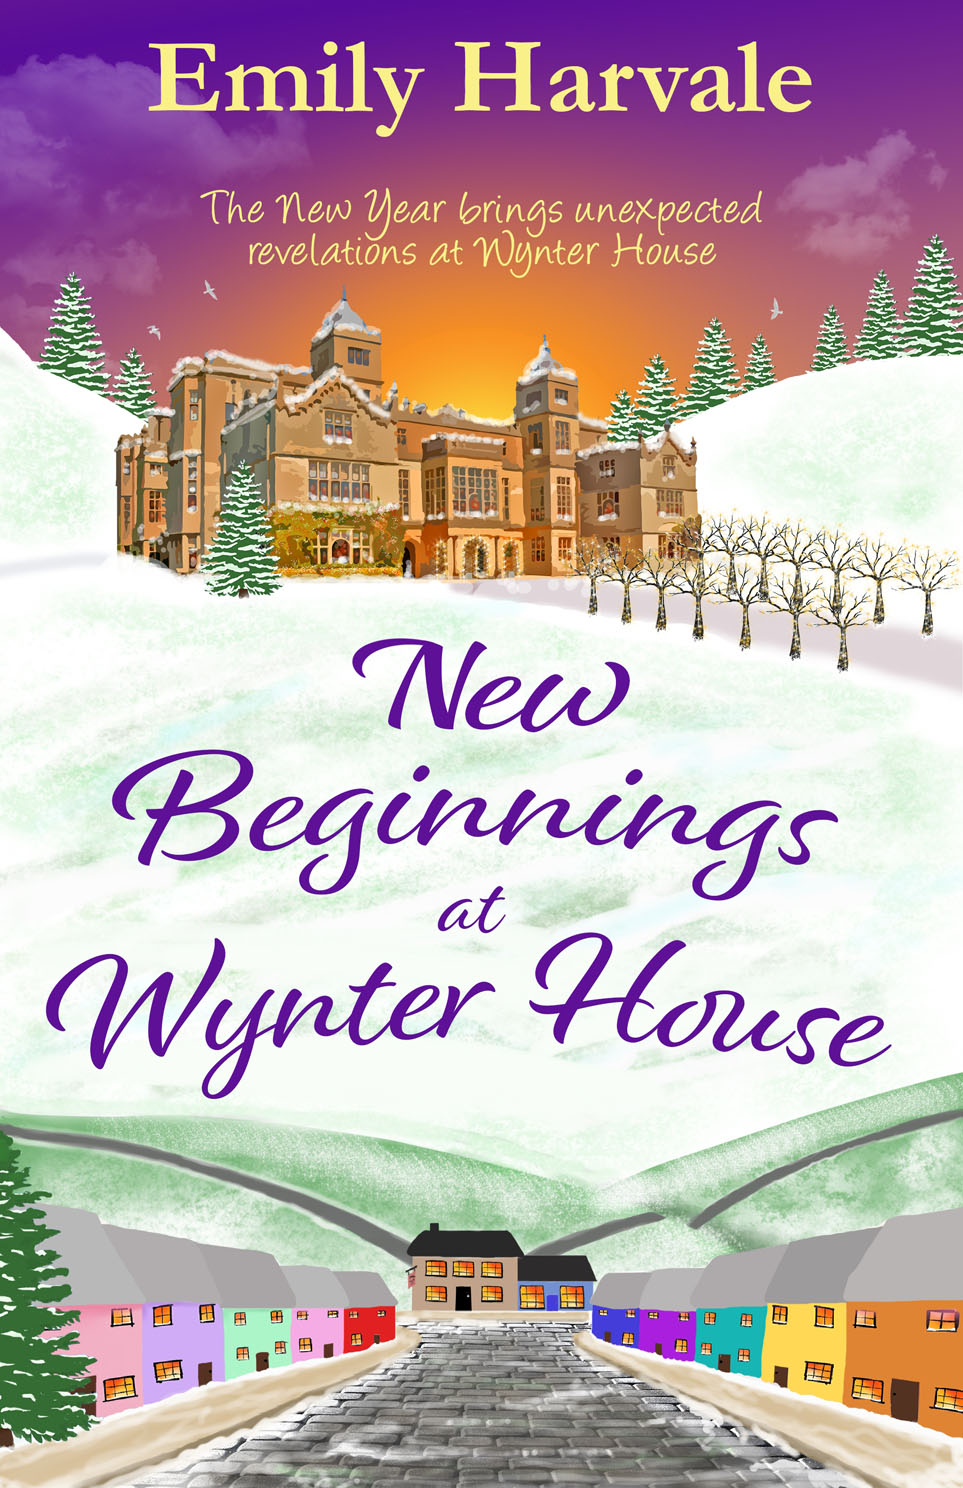 New Beginnings at Wynter House